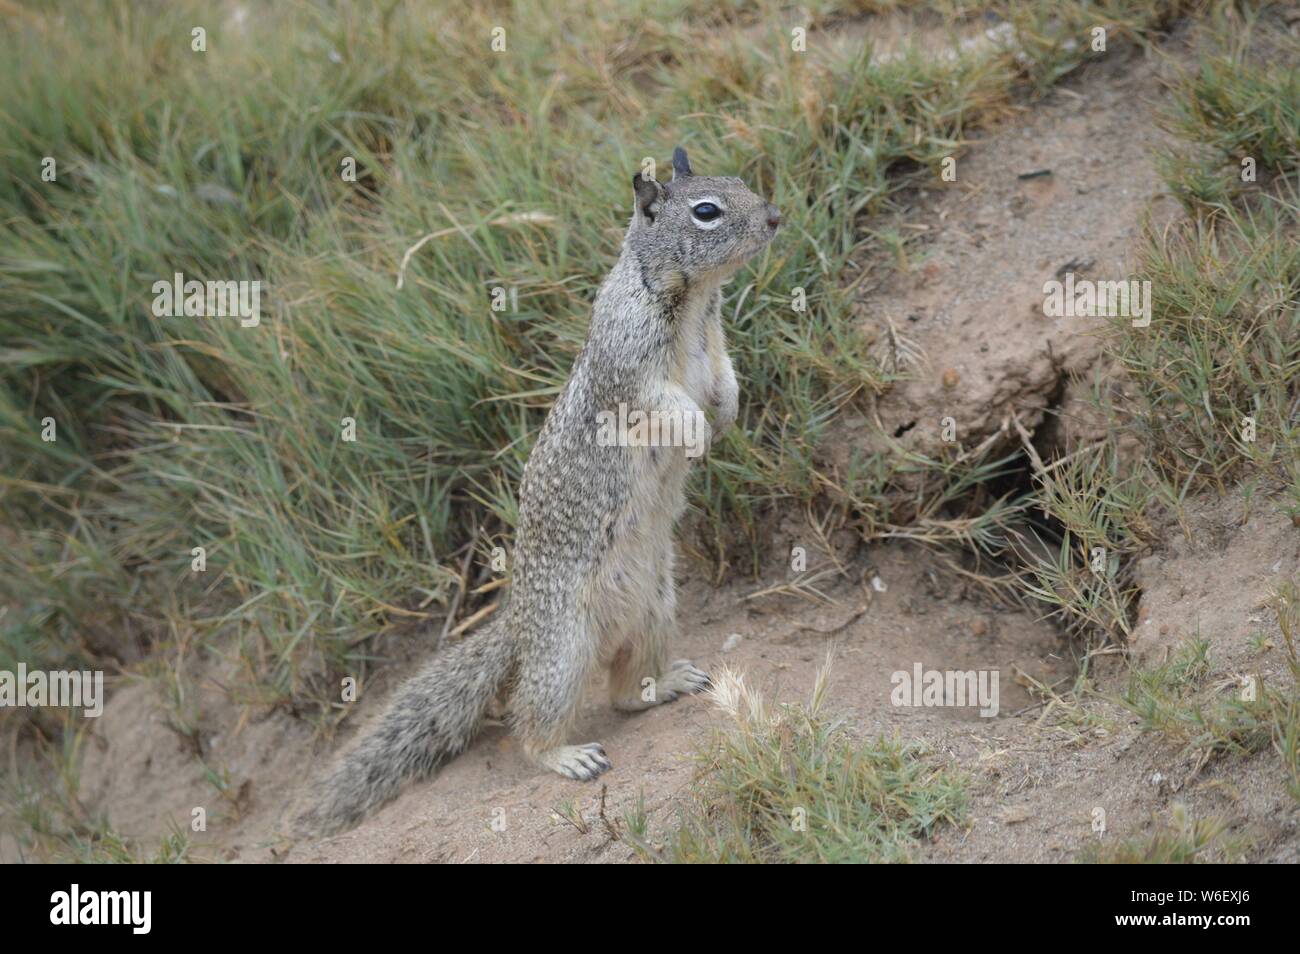 squirrel watching out in an upright position Stock Photo